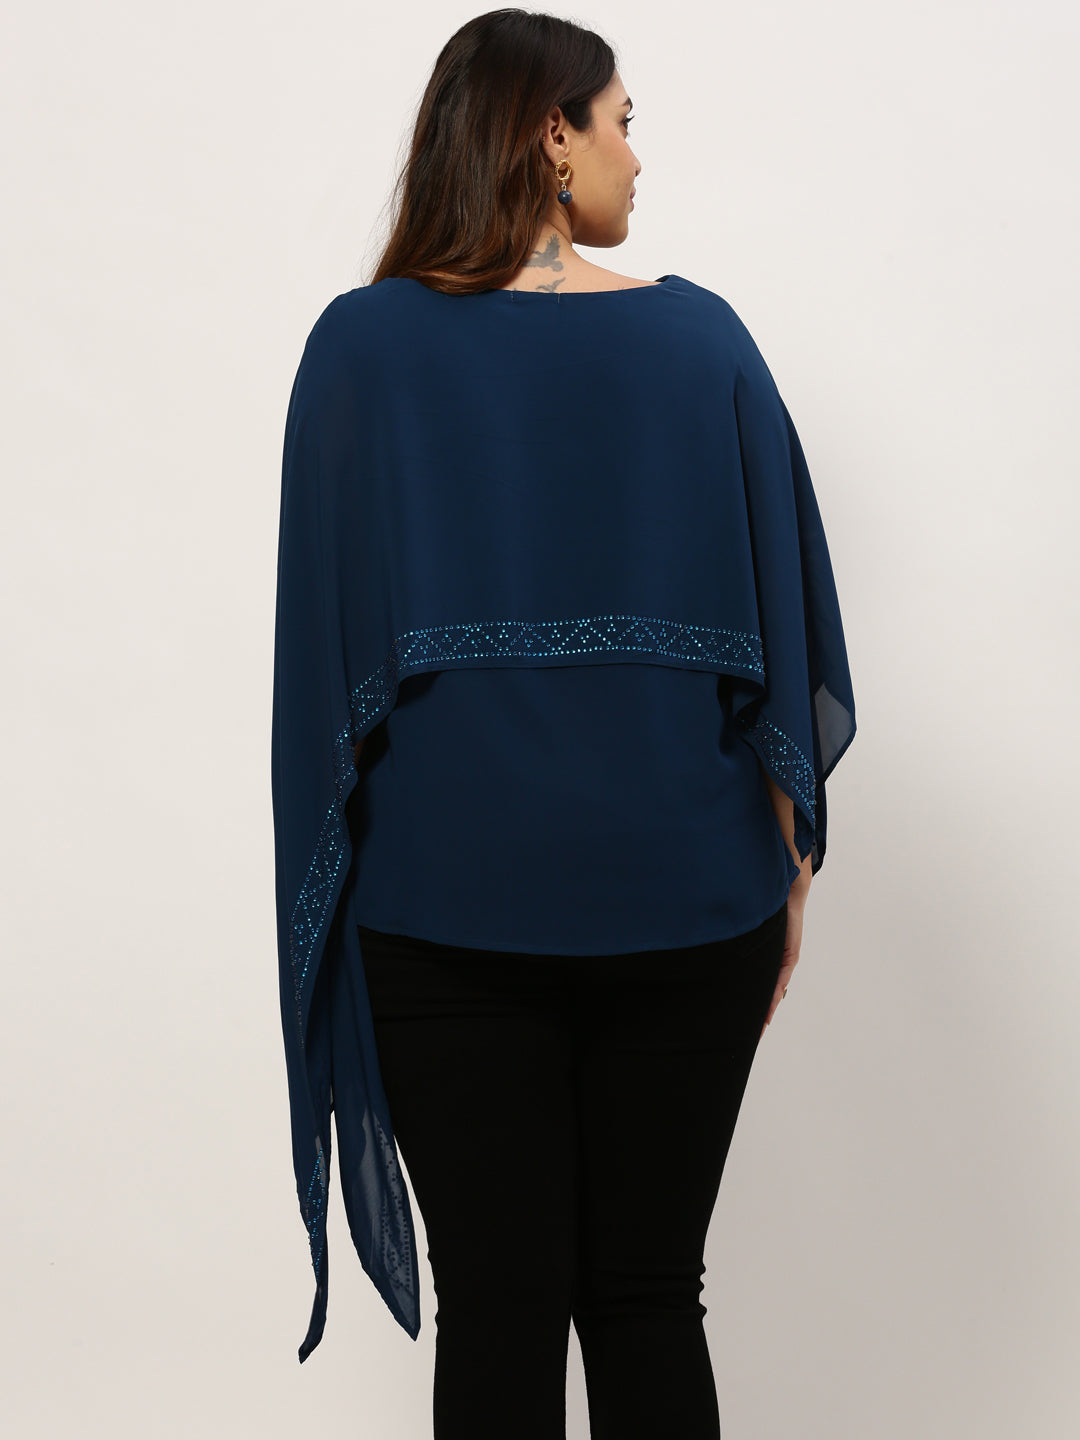 Women Boat Neck Solid Teal Top